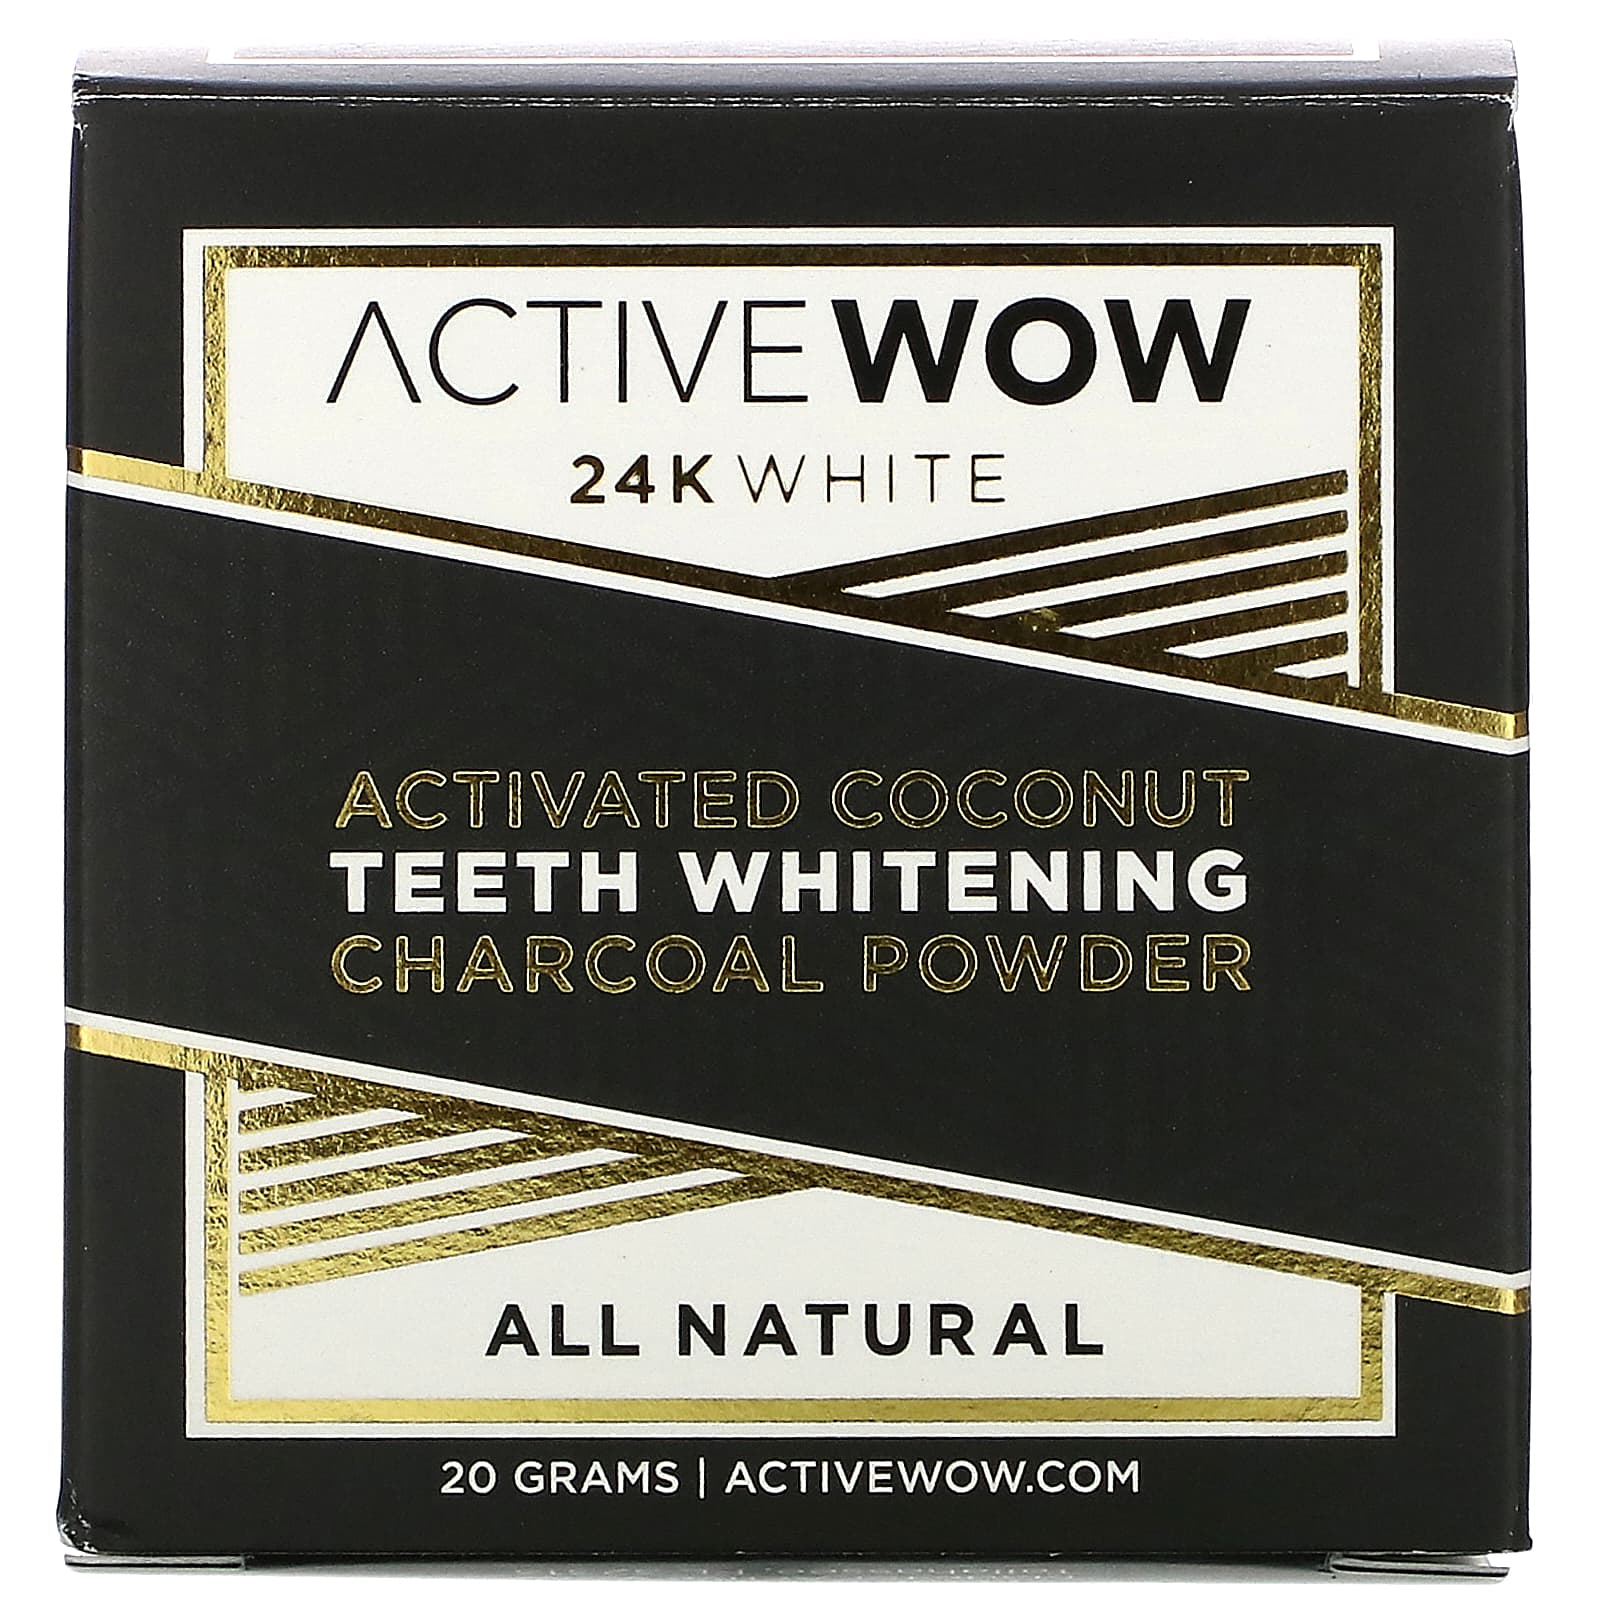 Active Wow, 24K White, All Natural Teeth Whitening Charcoal Powder, Activated  Coconut, 20 g